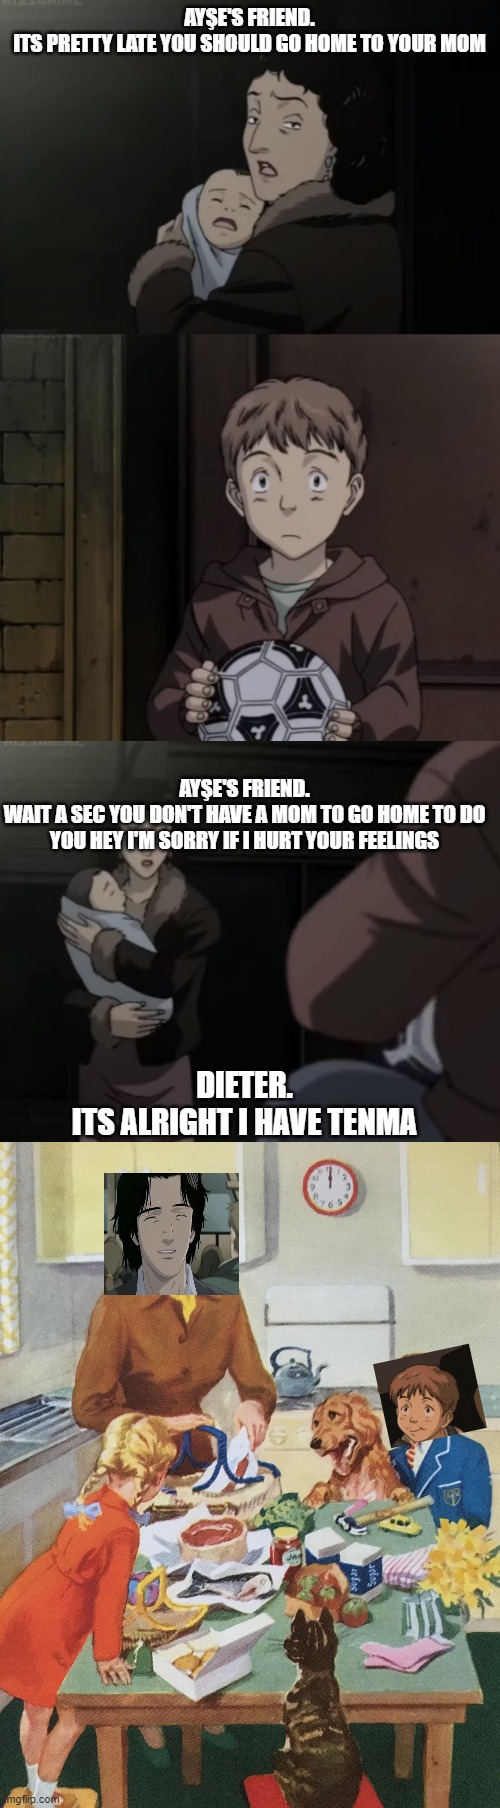 Naoki Urasawa Monster memes mommy Tenma. | AYŞE'S FRIEND.
ITS PRETTY LATE YOU SHOULD GO HOME TO YOUR MOM; AYŞE'S FRIEND.
WAIT A SEC YOU DON'T HAVE A MOM TO GO HOME TO DO YOU HEY I'M SORRY IF I HURT YOUR FEELINGS; DIETER.
ITS ALRIGHT I HAVE TENMA | image tagged in monster memes | made w/ Imgflip meme maker